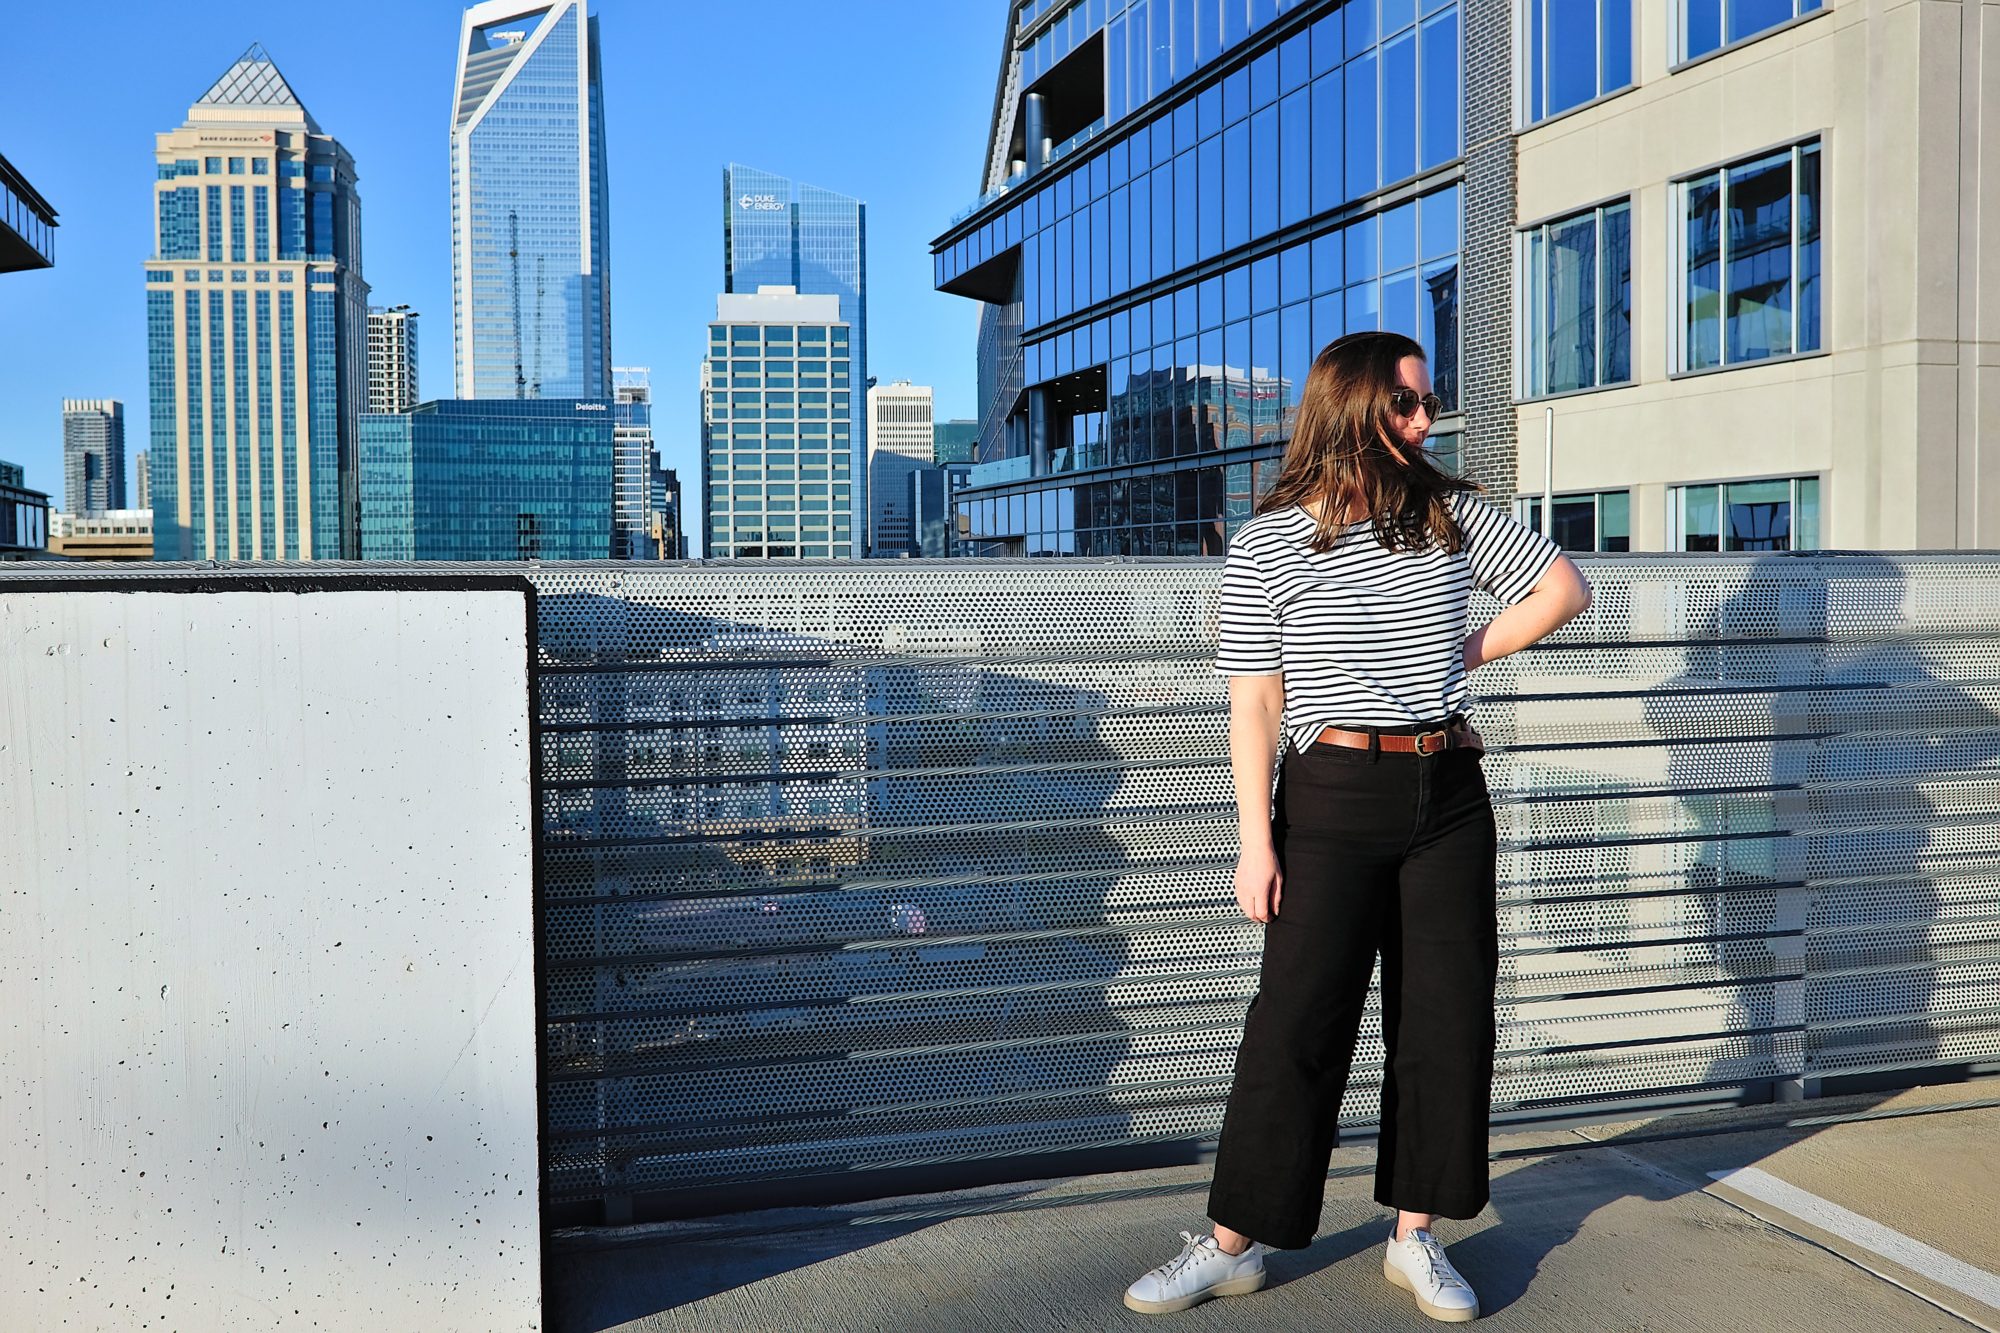 Alyssa stands on a parking deck rooftop with the Charlotte skyline in the background